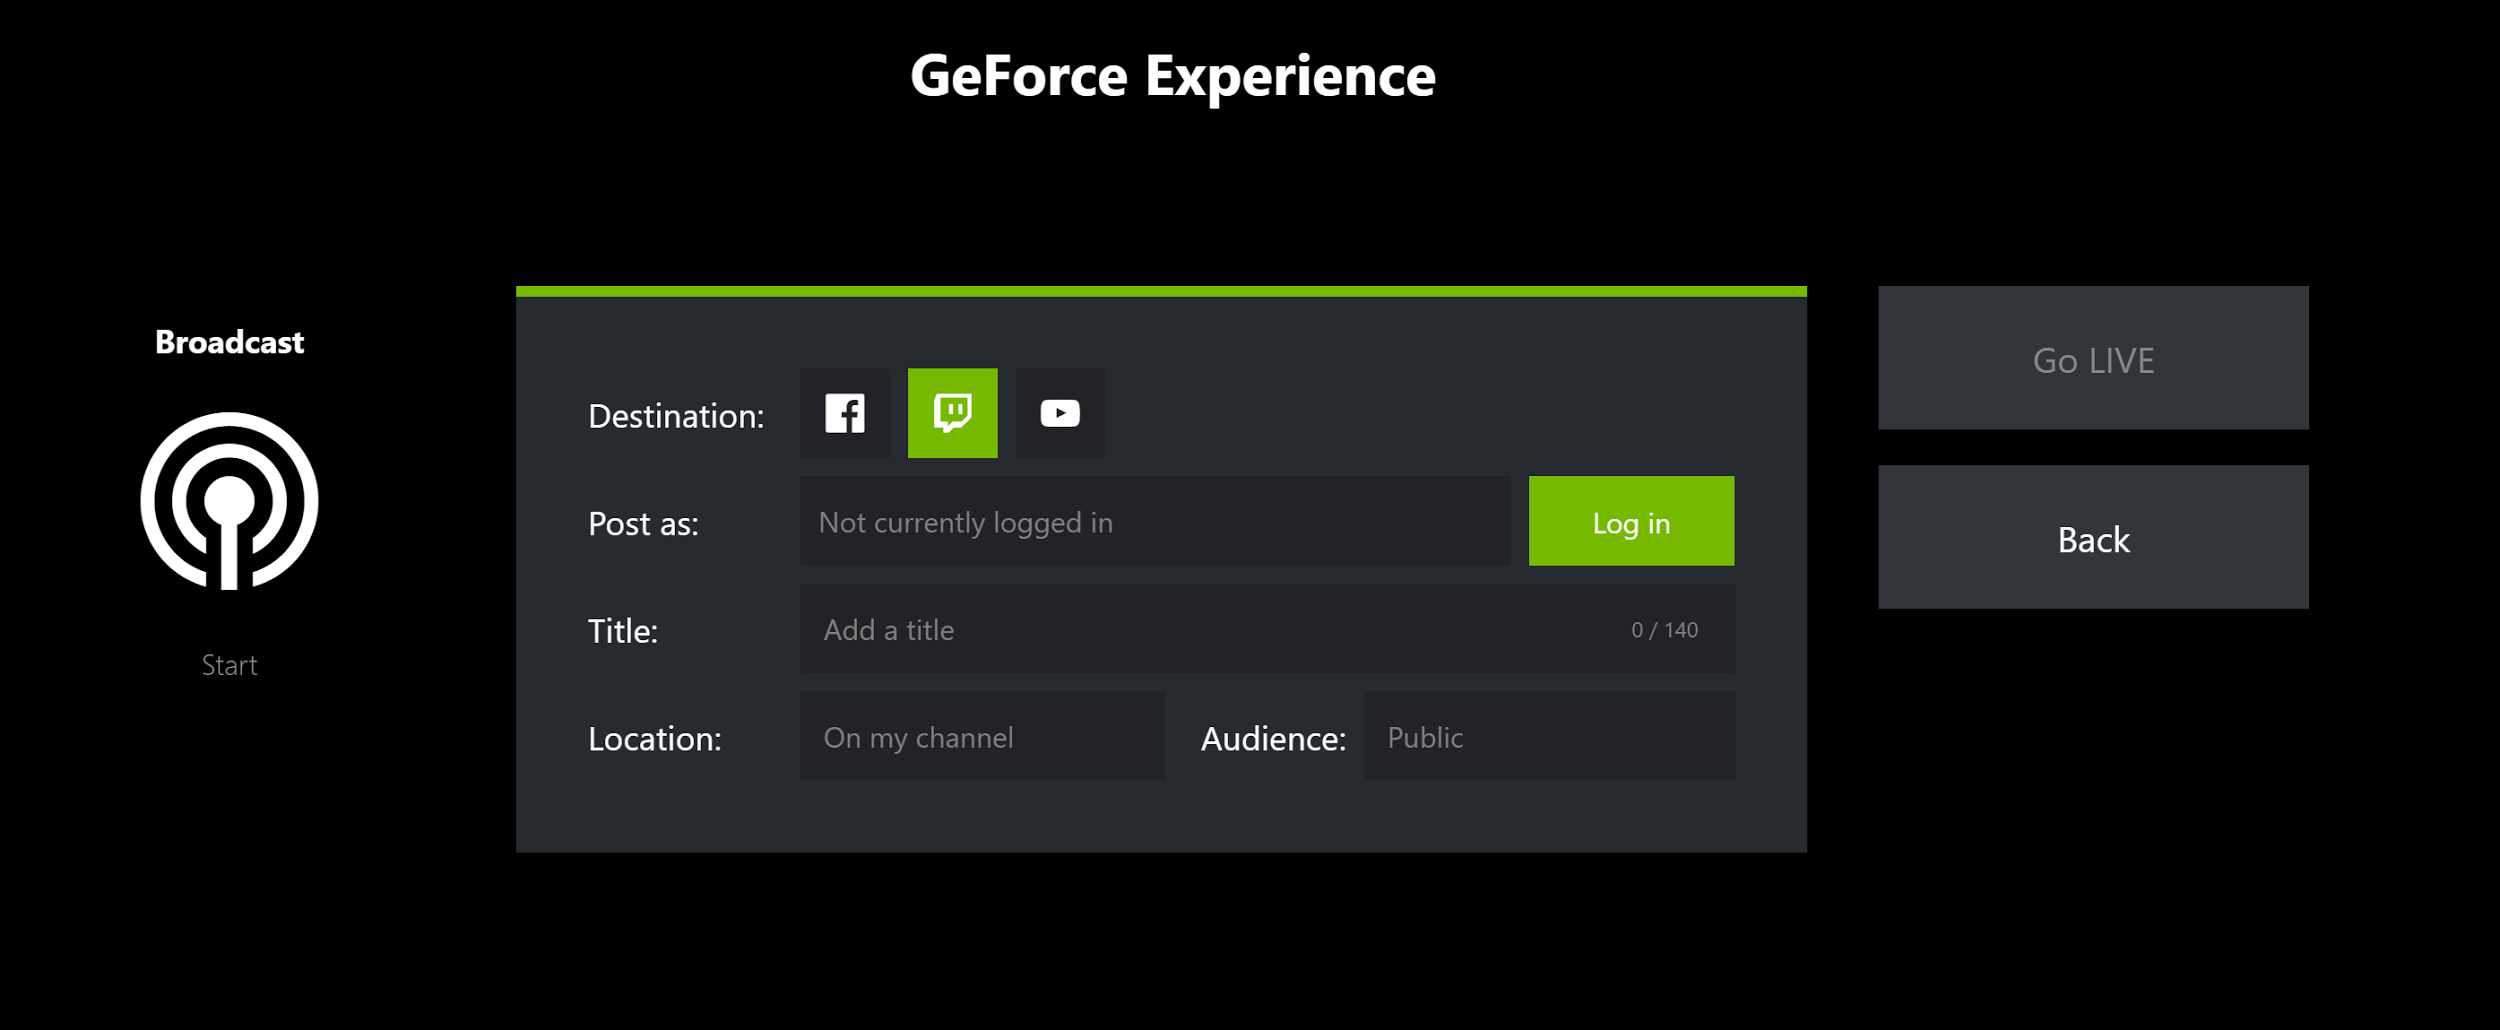 geforce experience broadcasting tutorial 0011 - streamlabs obs fortnite overlay